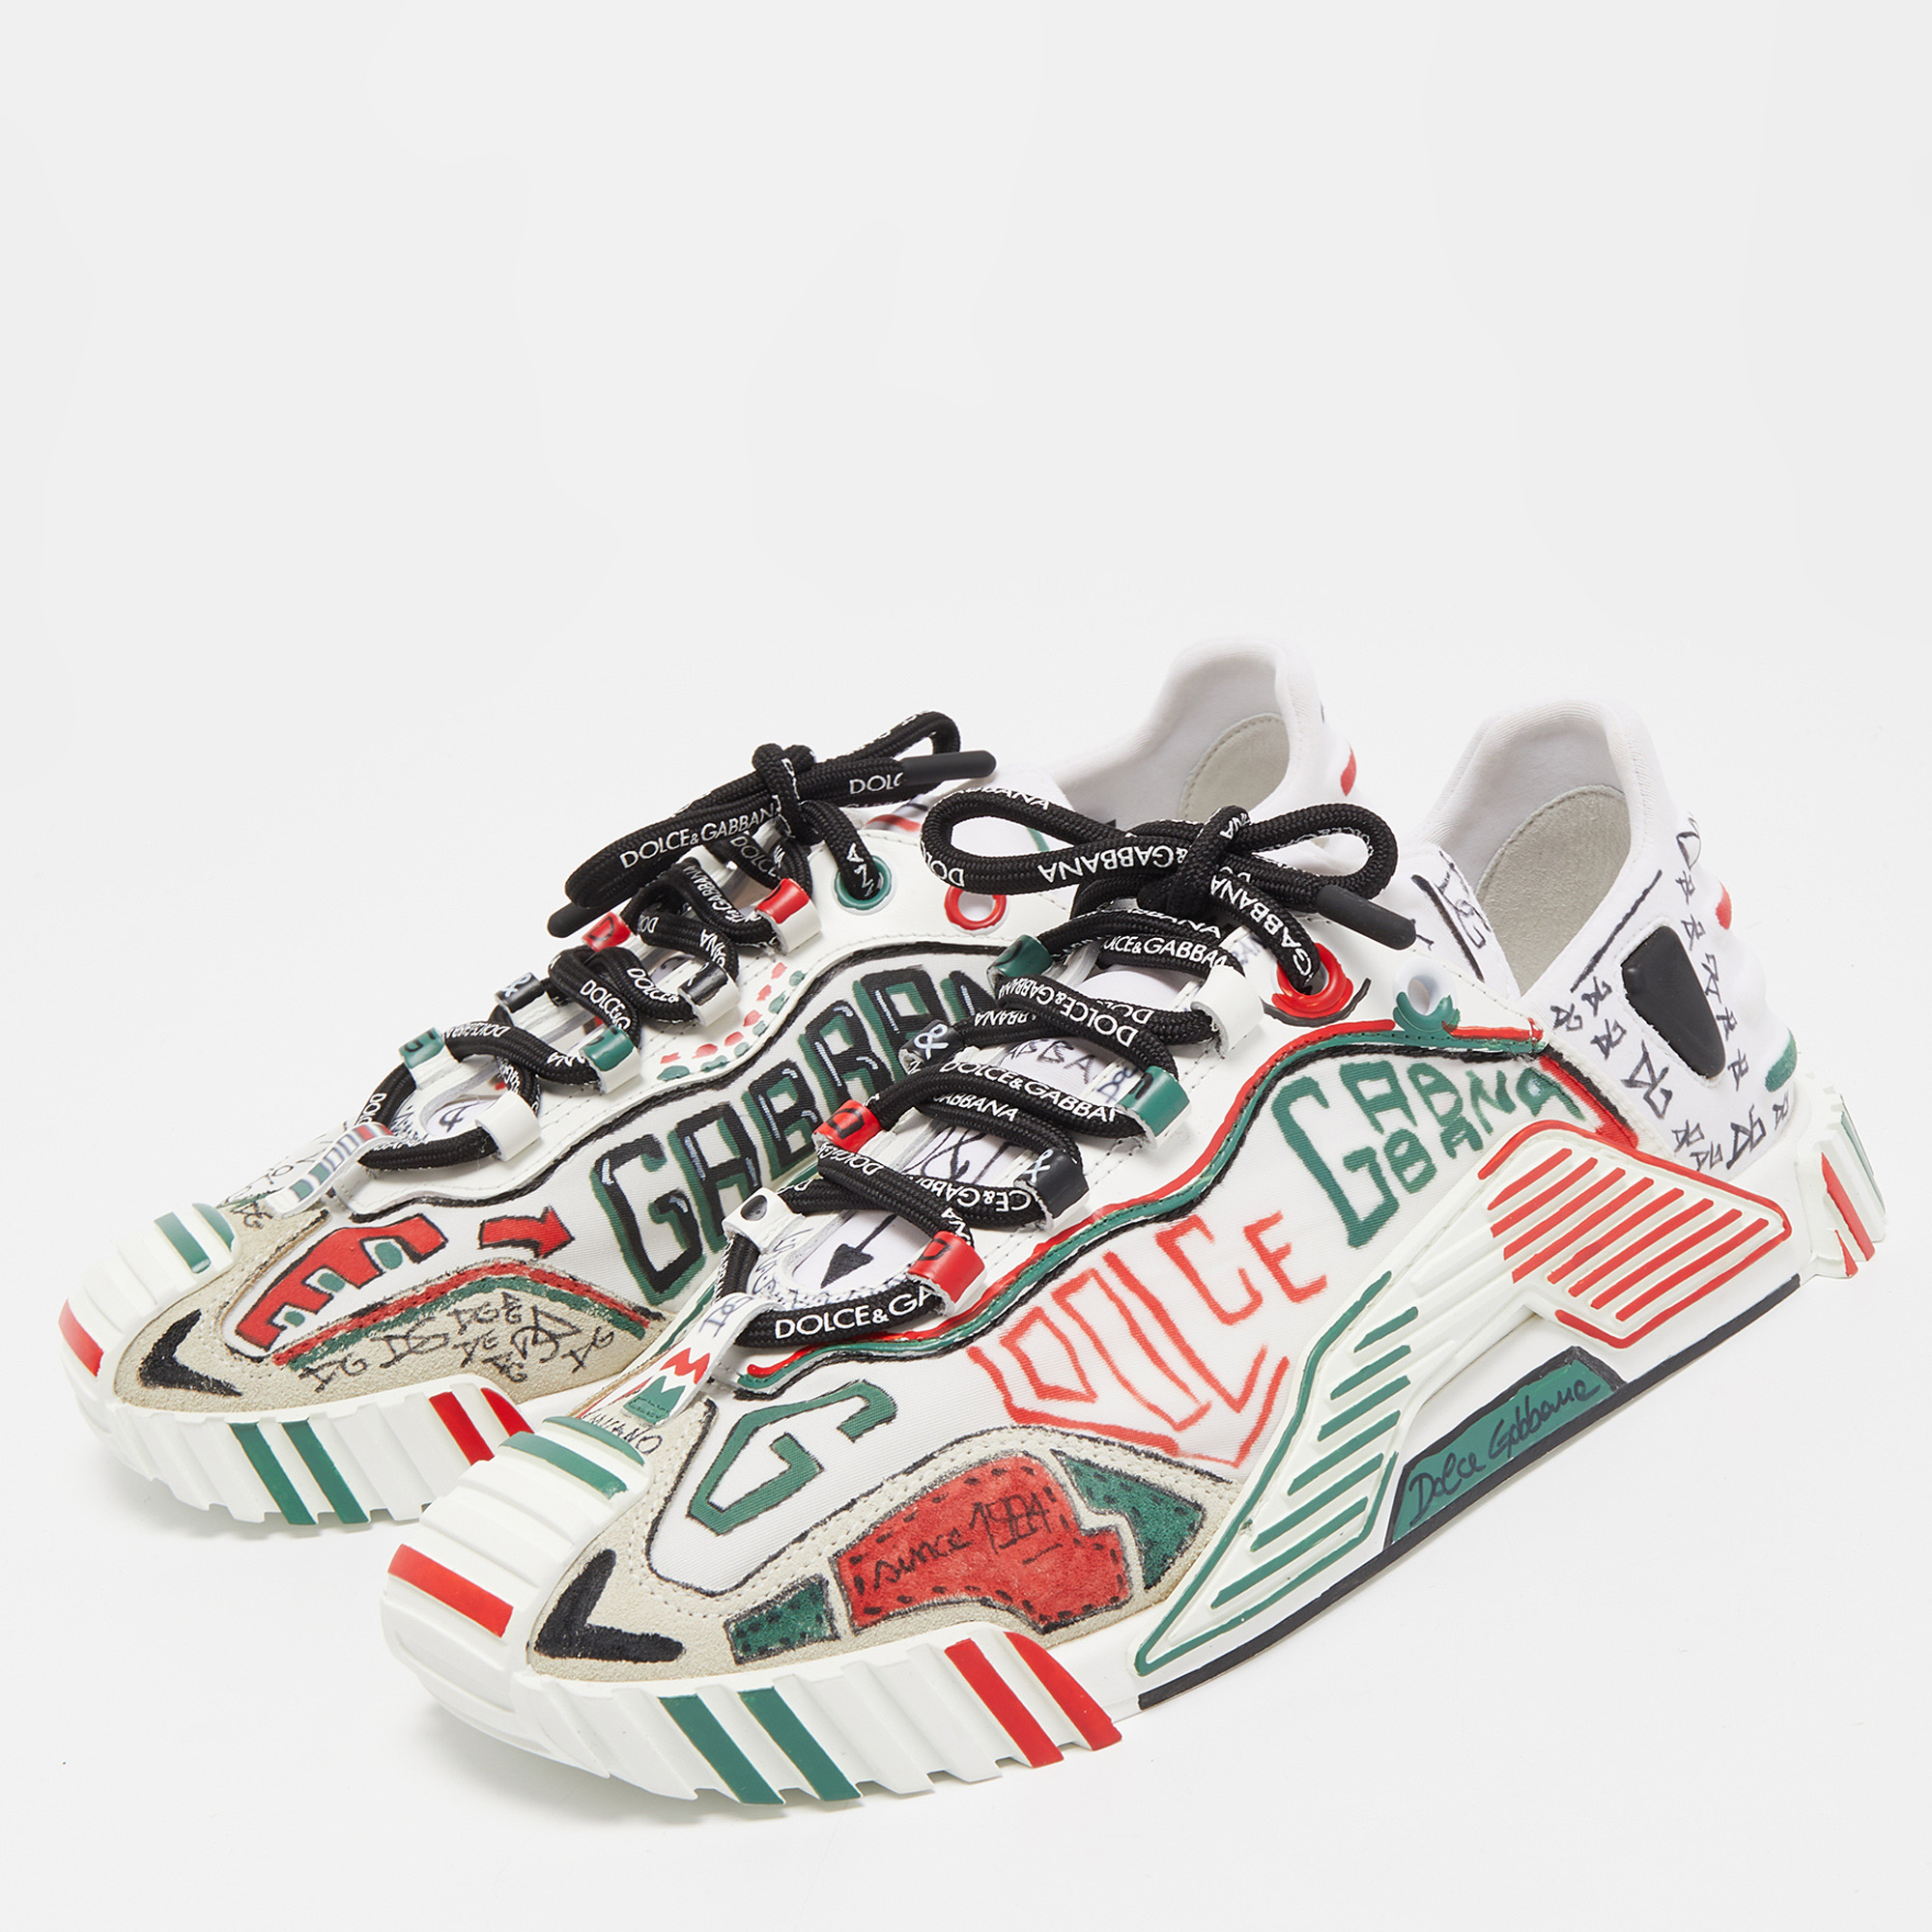 

Dolce & Gabbana Multicolor Canvas and Fabric Graffiti Print Ns1 Low Top Sneakers Size